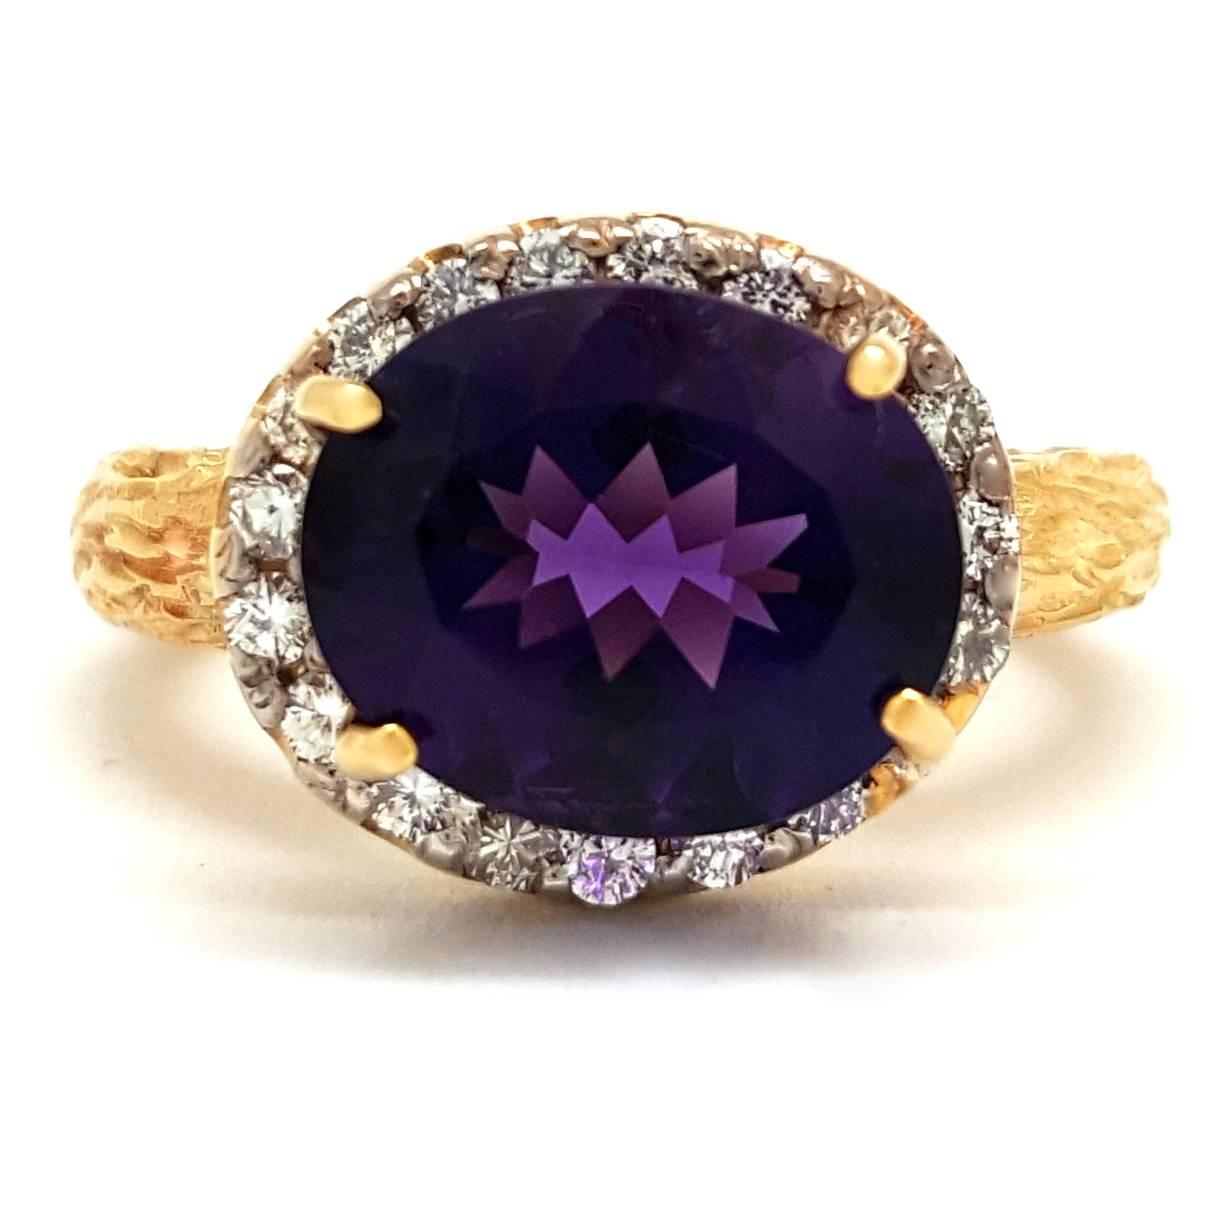 This one-of-a-kind ring features a faceted, oval-cut amethyst gemstone set at the center of a bark-carved 14k yellow gold ring. The shimmering Siberian amethyst weights 2.89 carats, and it is surrounded by a halo of round brilliant-cut diamonds for